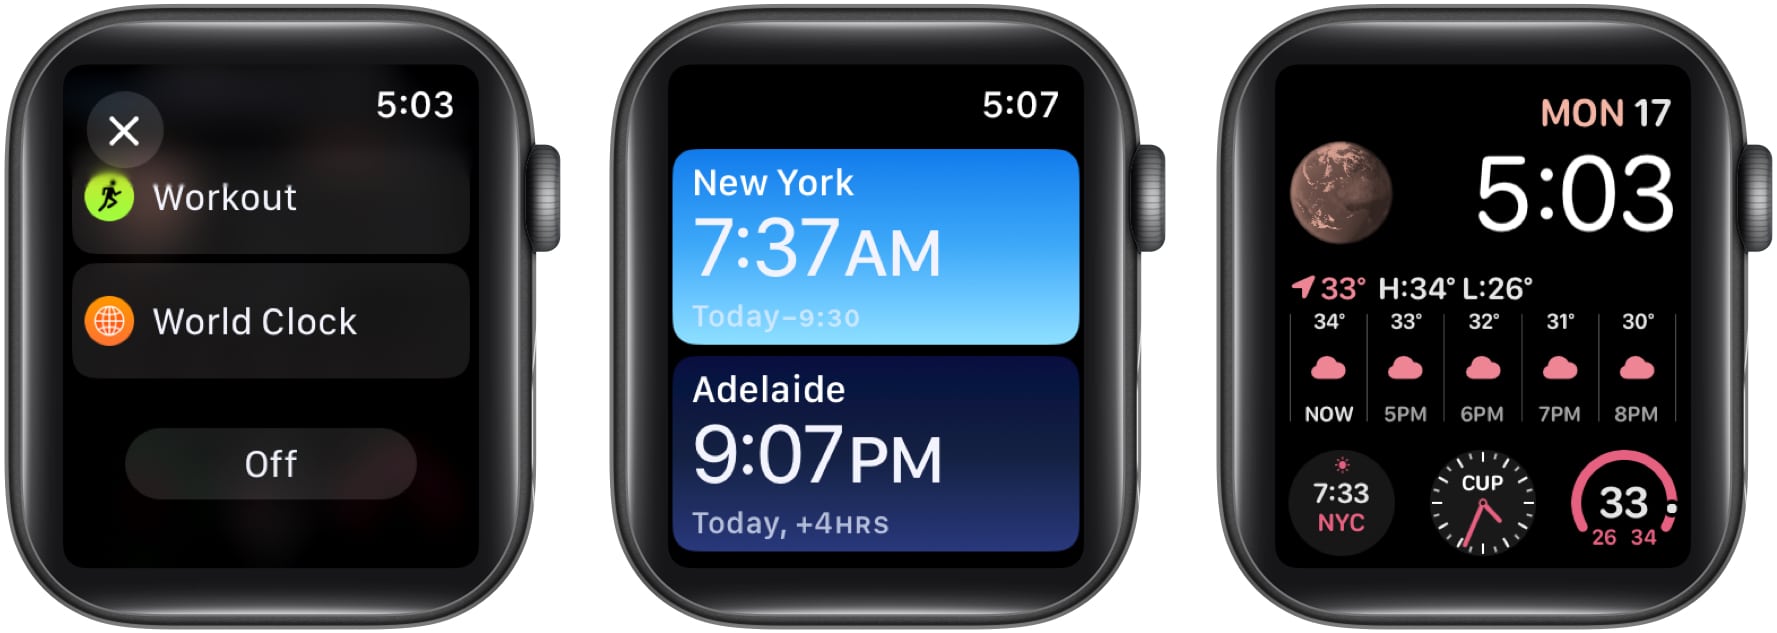 Select added city on Apple Watch Face